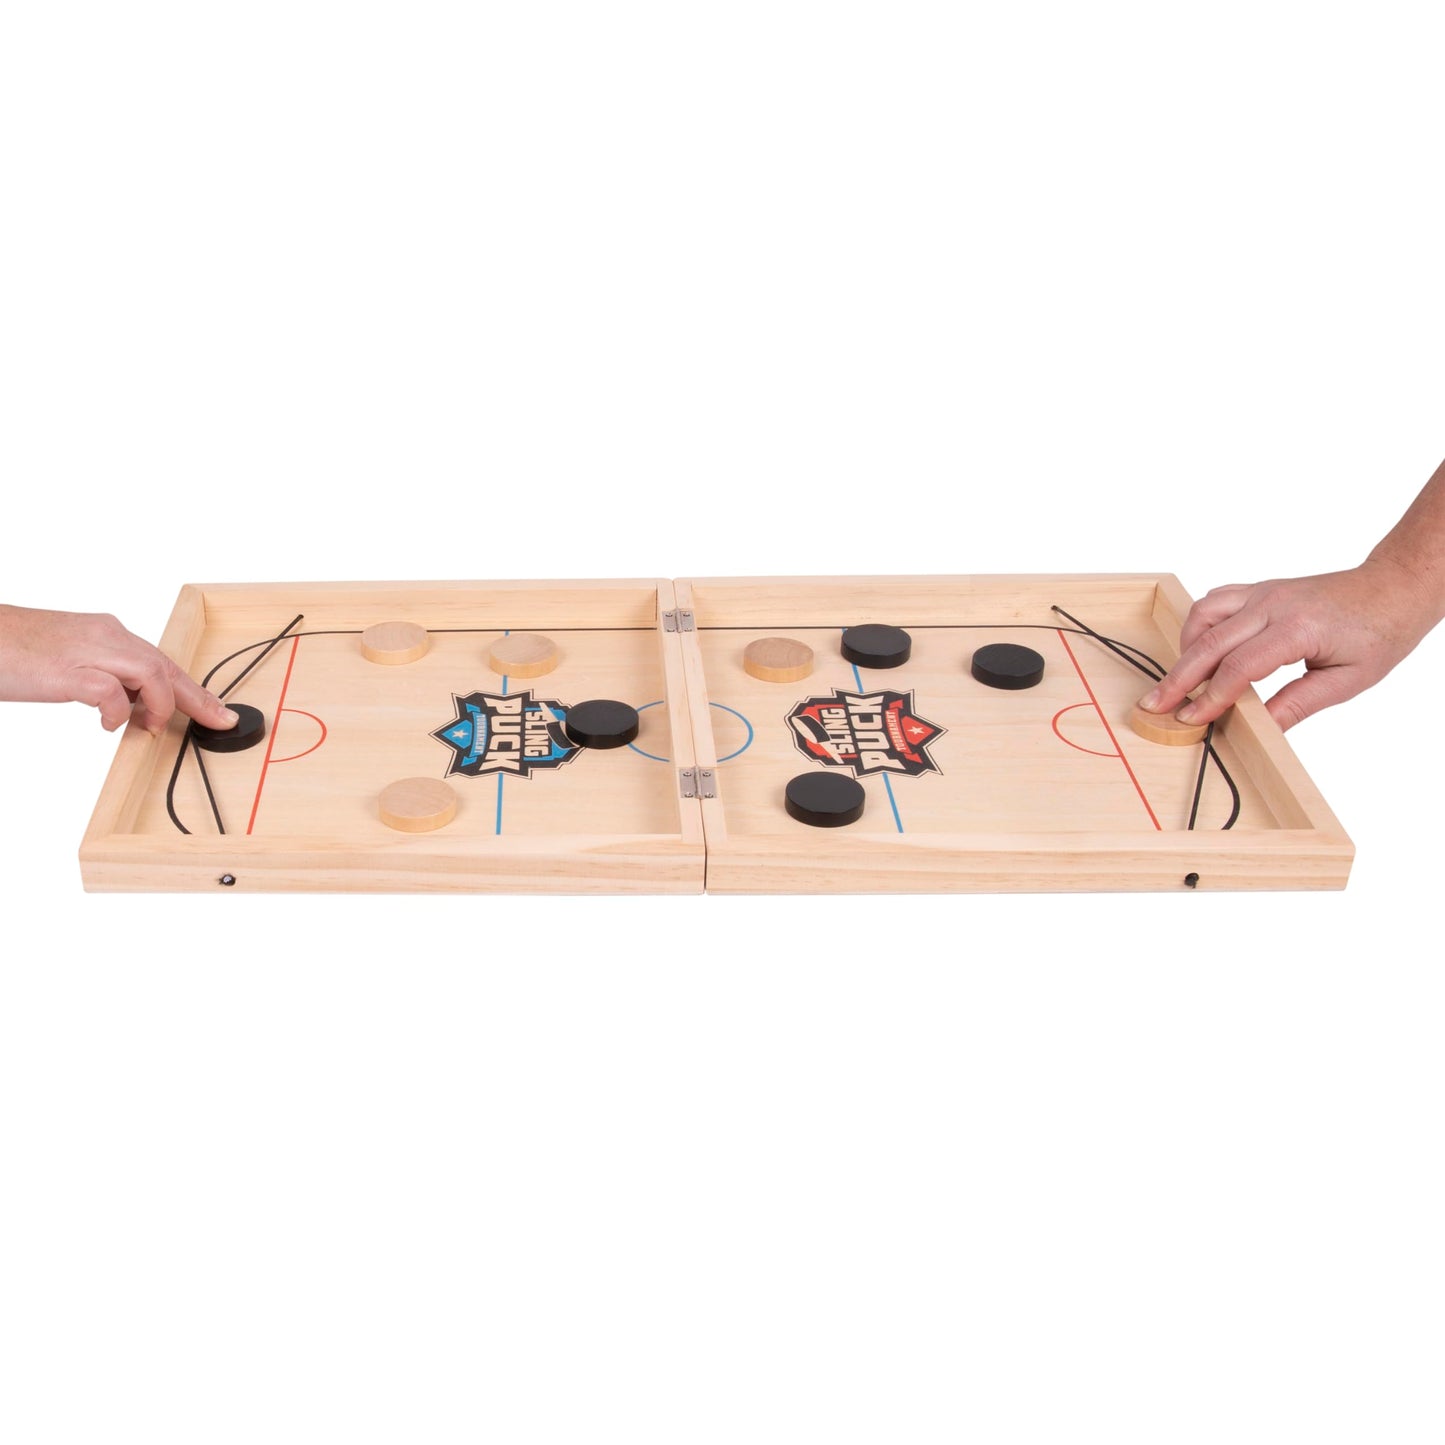 Crazy Games Fast Sling Puck Board Game I 14" Small Wooden Family Games, Table Top Hockey Game for Adults & Kids, Competitive Game Ideal for Parties - amzGamess